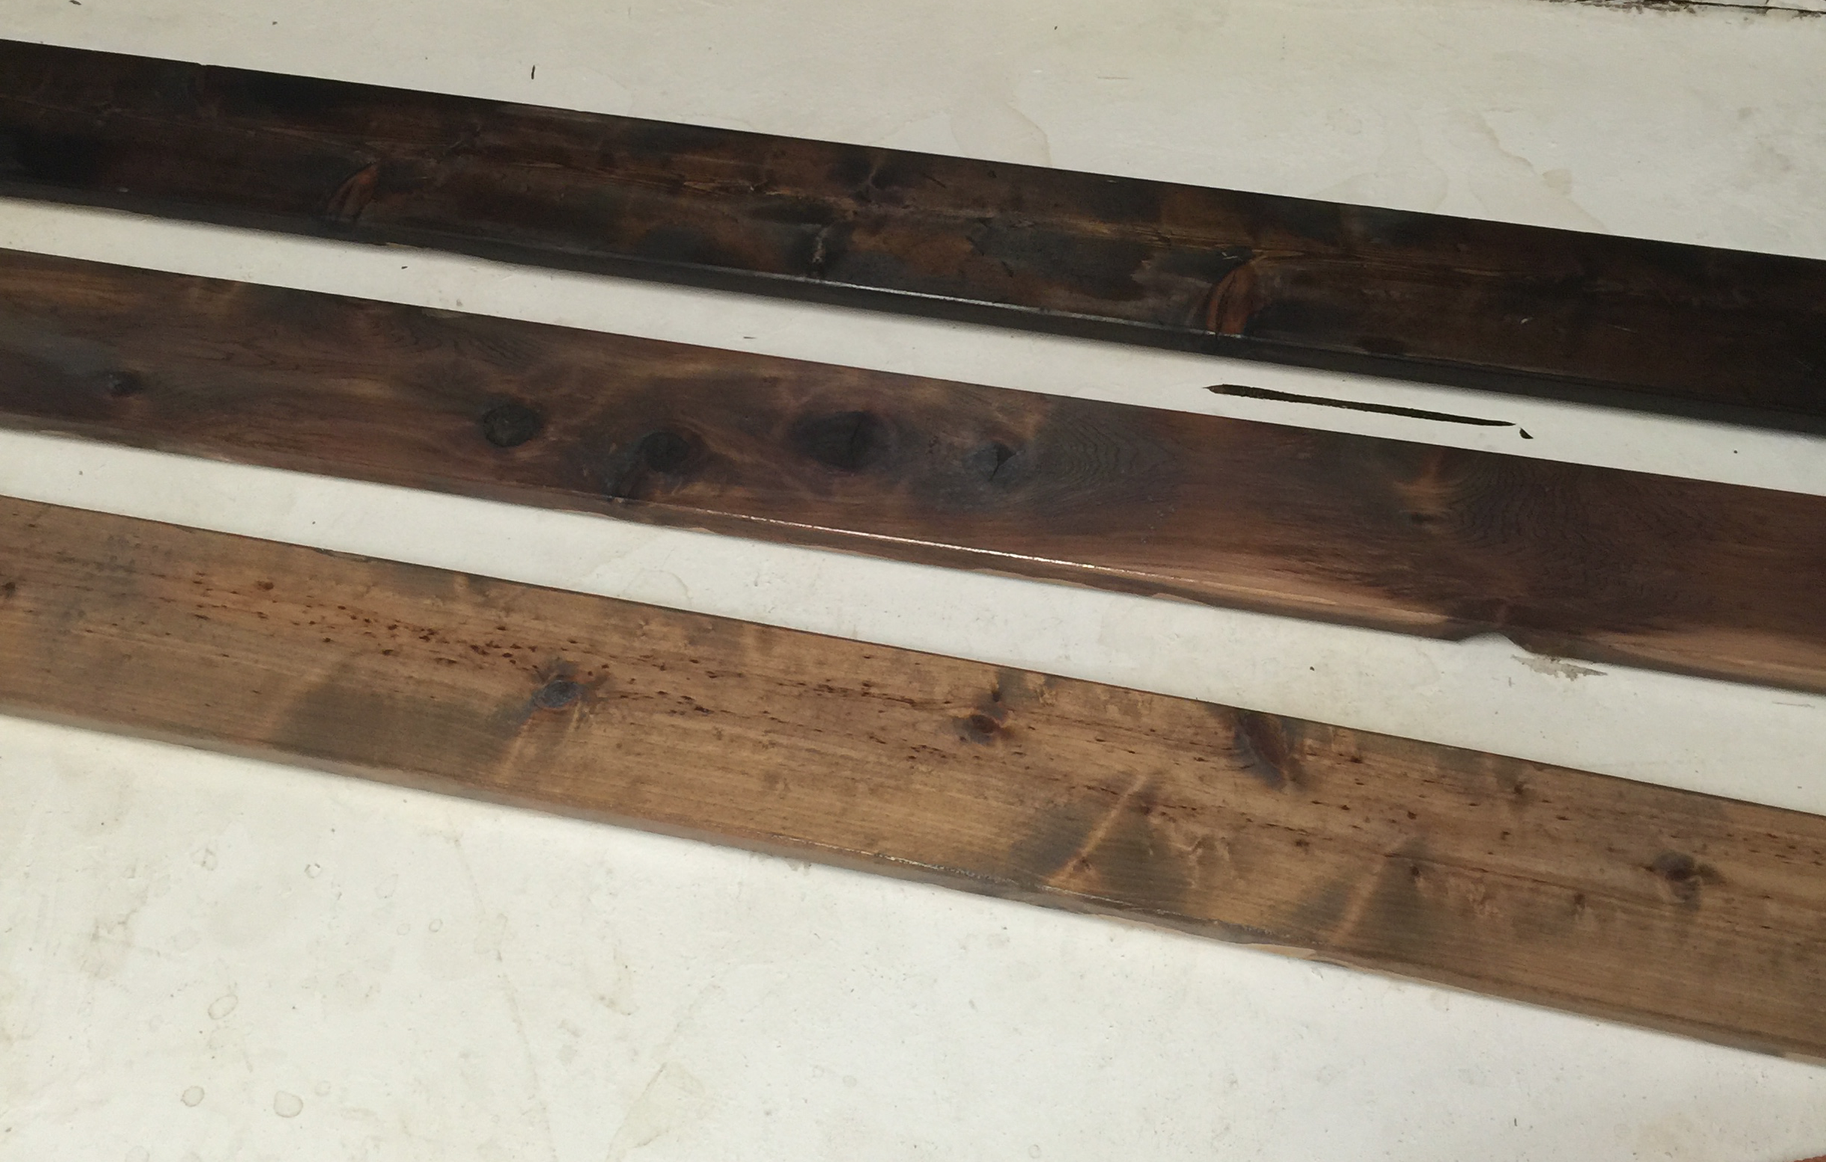 I started by staining with Minimax stain. The top board is Expresso, the middle board is Dark Walnut and the bottom Weathered Oak. I stained the sides so if the boards were uneven you would not see unstained wood. We used new pine boards from Home Depot (our weekend date night hangout).